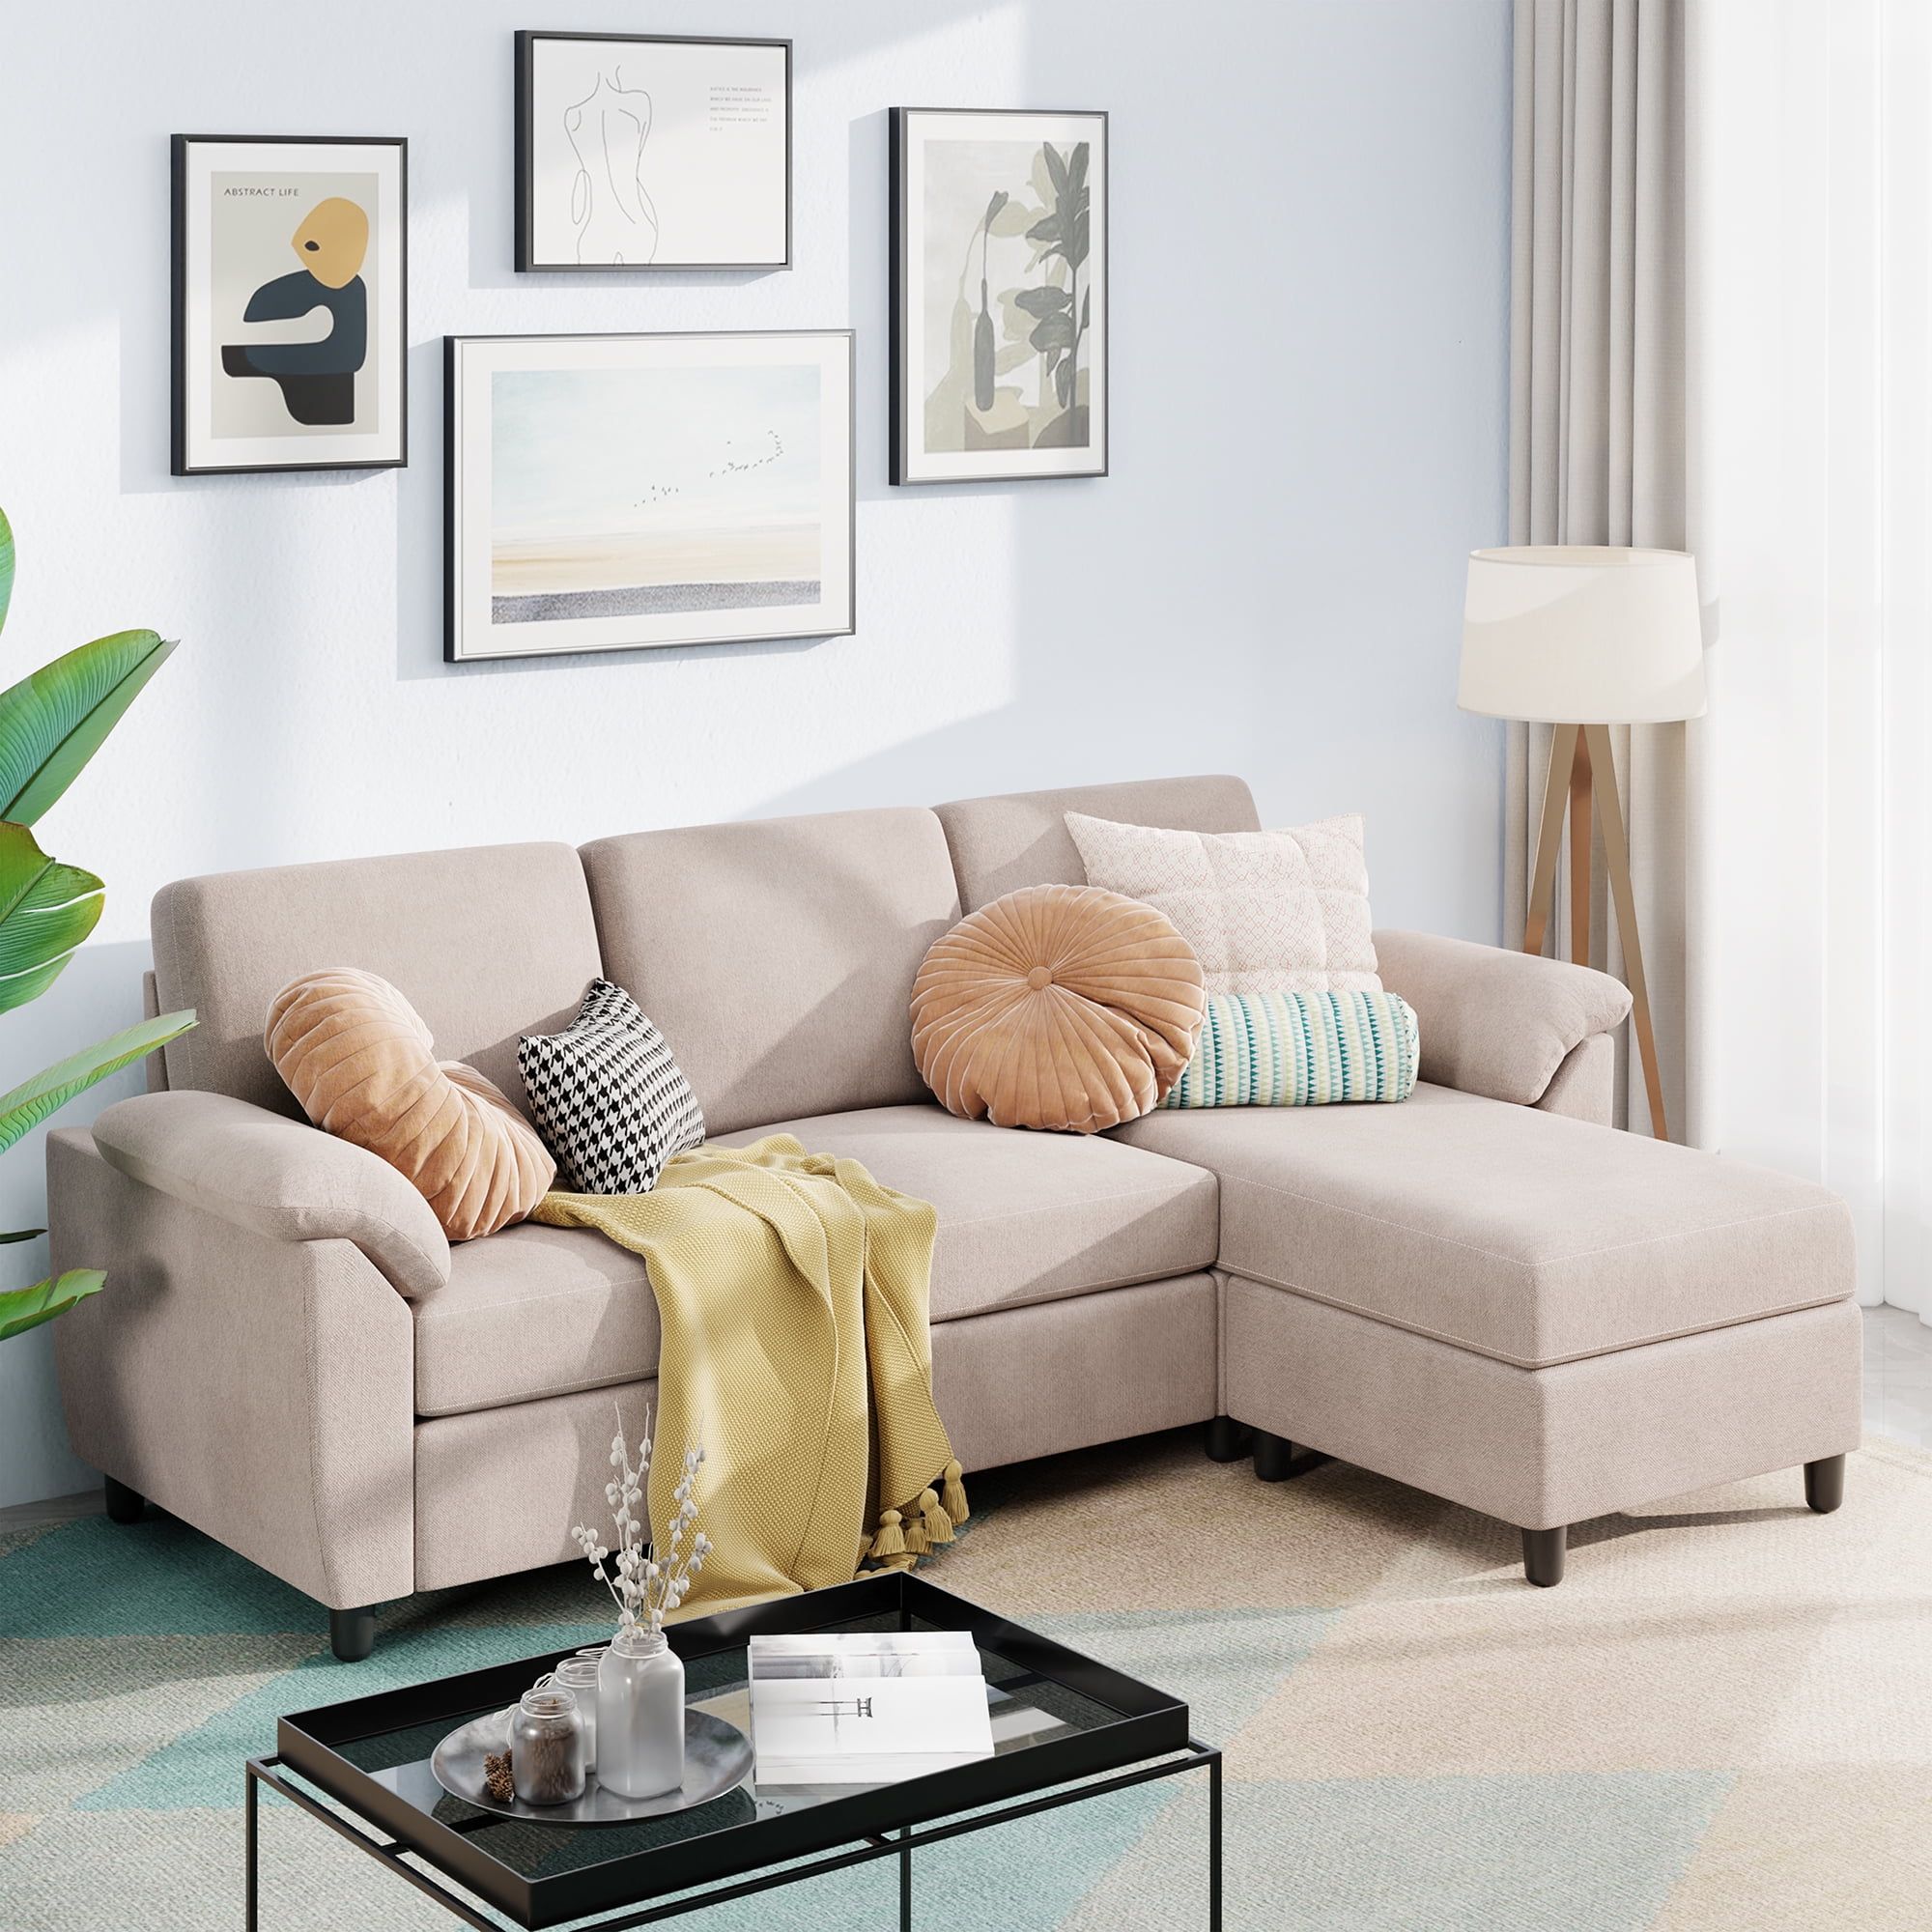 Sobaniilo 79" Convertible Sectional Sofa Couch, Linen Fabric L Shaped Couch  With Reversible Ottoman, 3 Seat Small Sectional Sofa Couches For Living  Room, Apartment, Small Space, Beige – Walmart With Regard To Small L Shaped Sectional Sofas In Beige (View 3 of 15)